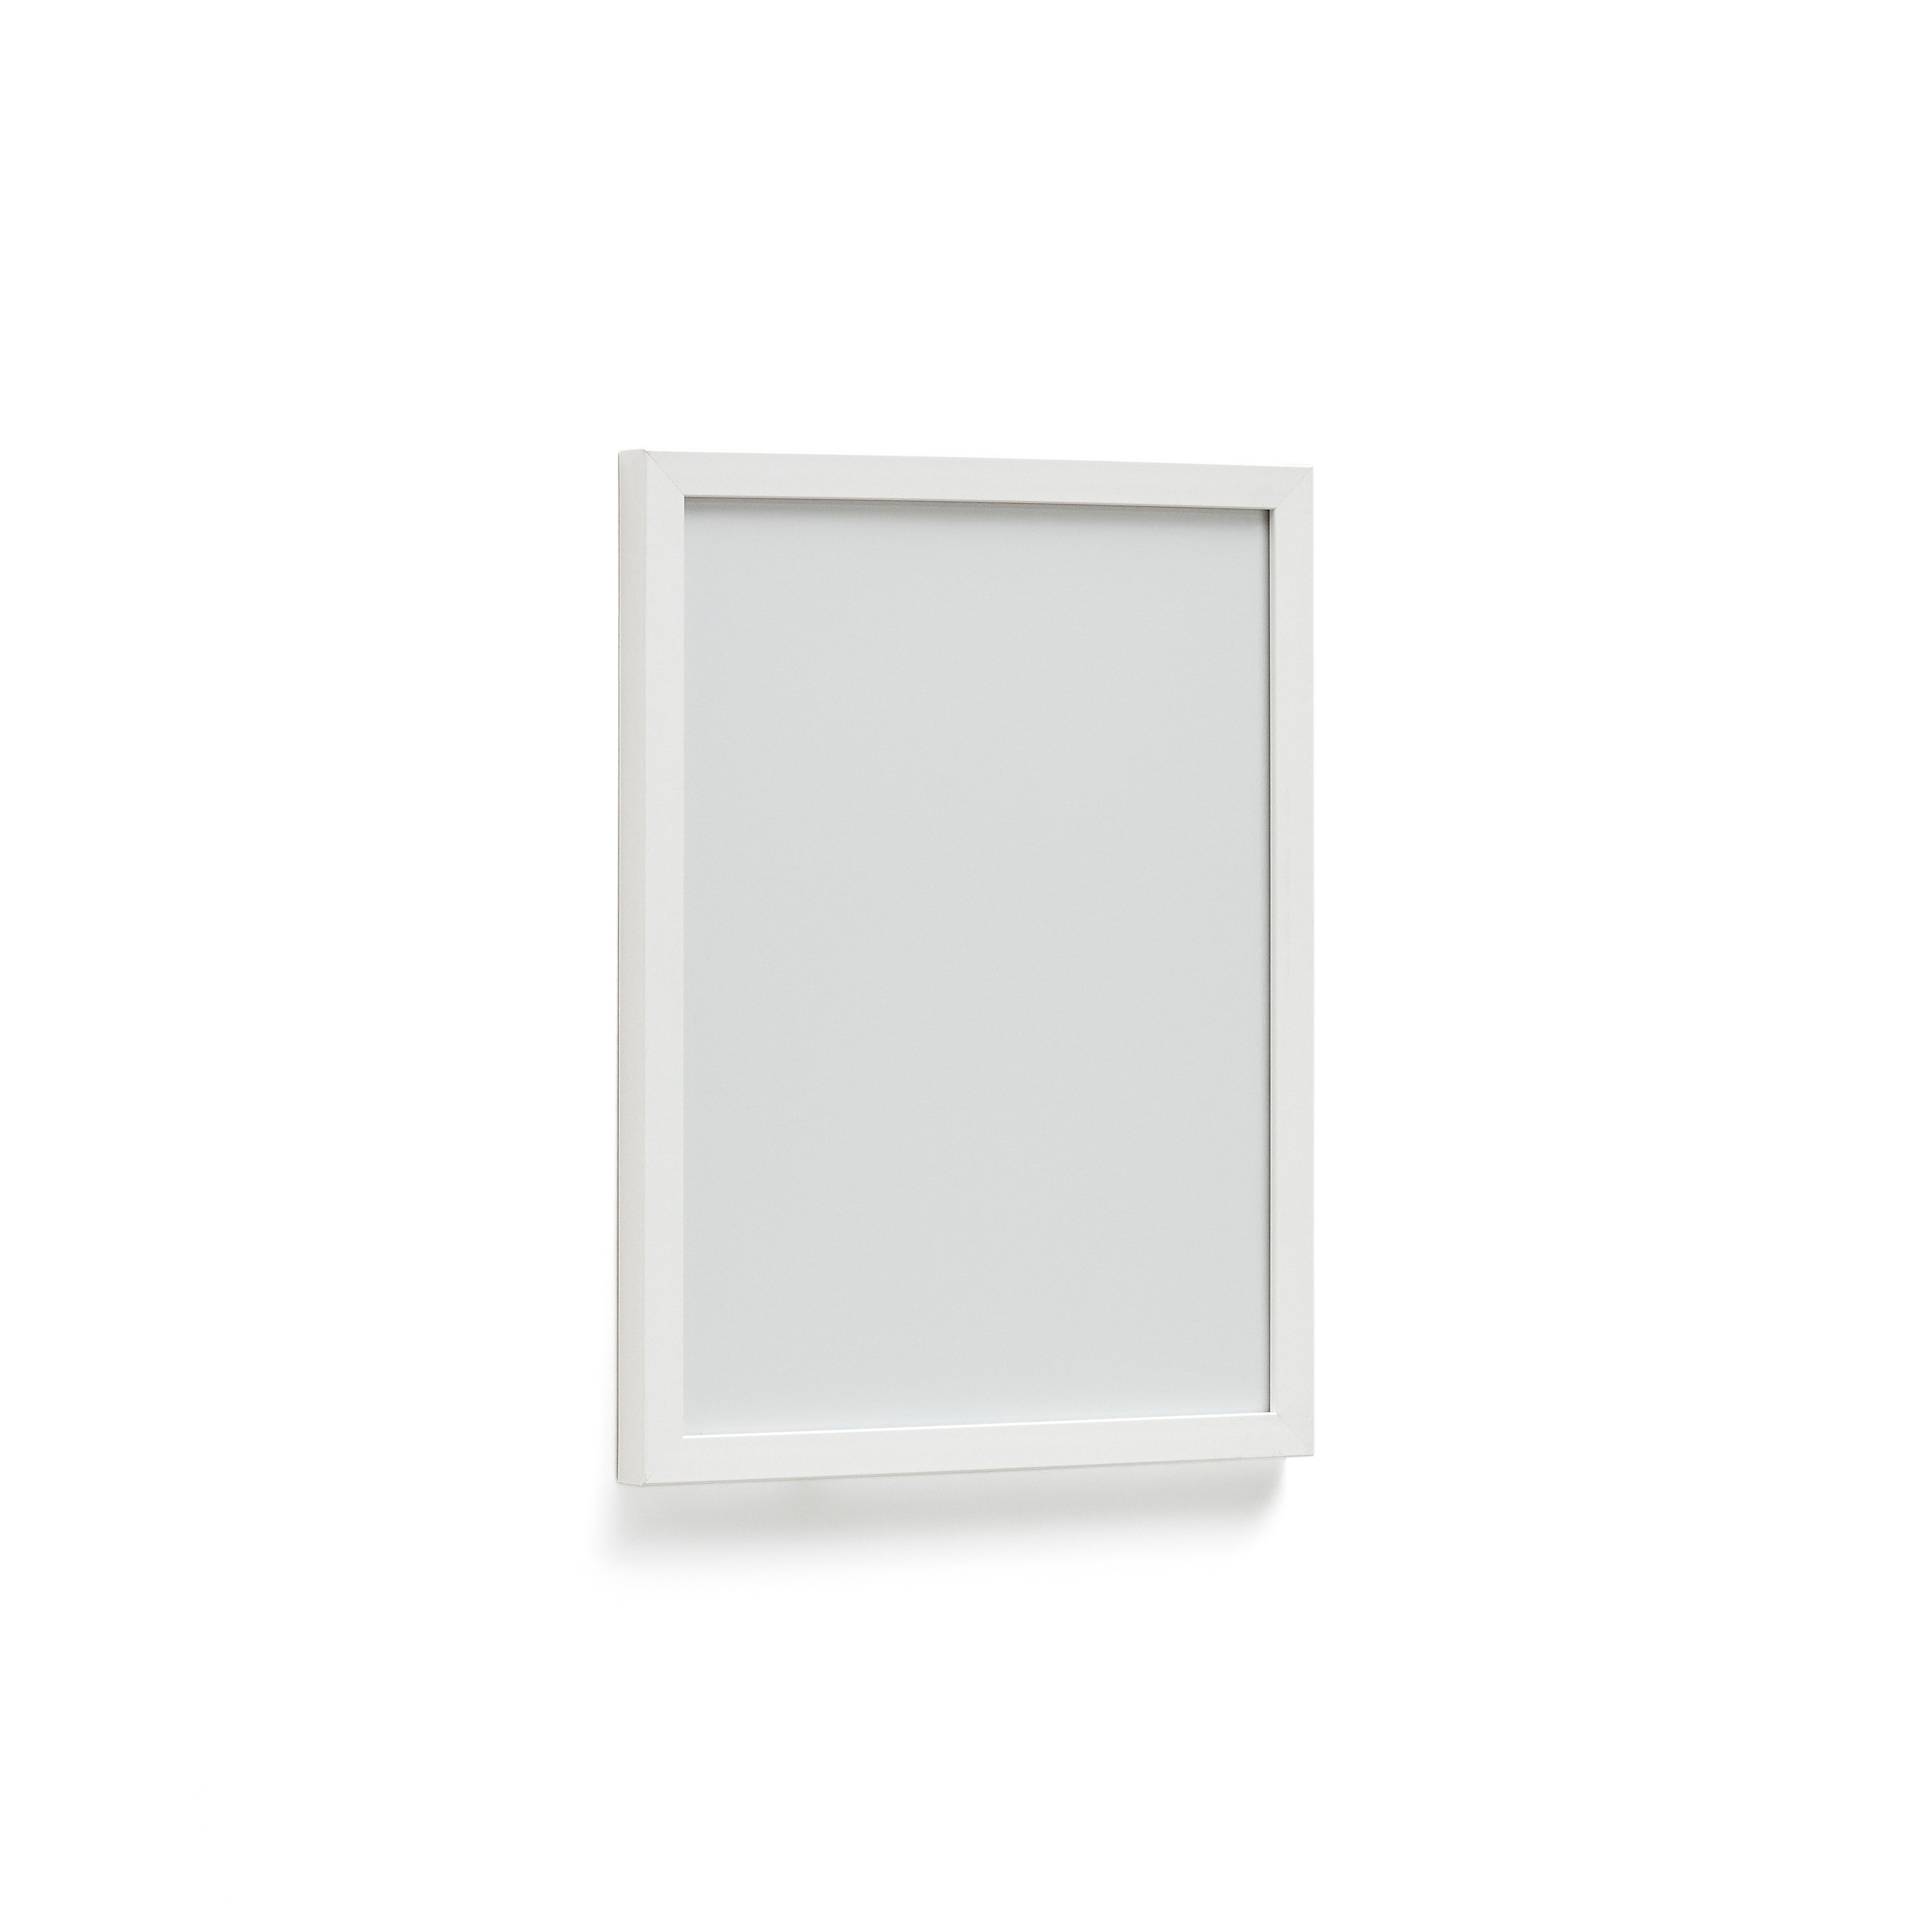 Neale wooden photo frame with white coating, 29.8 x 39.8 cm